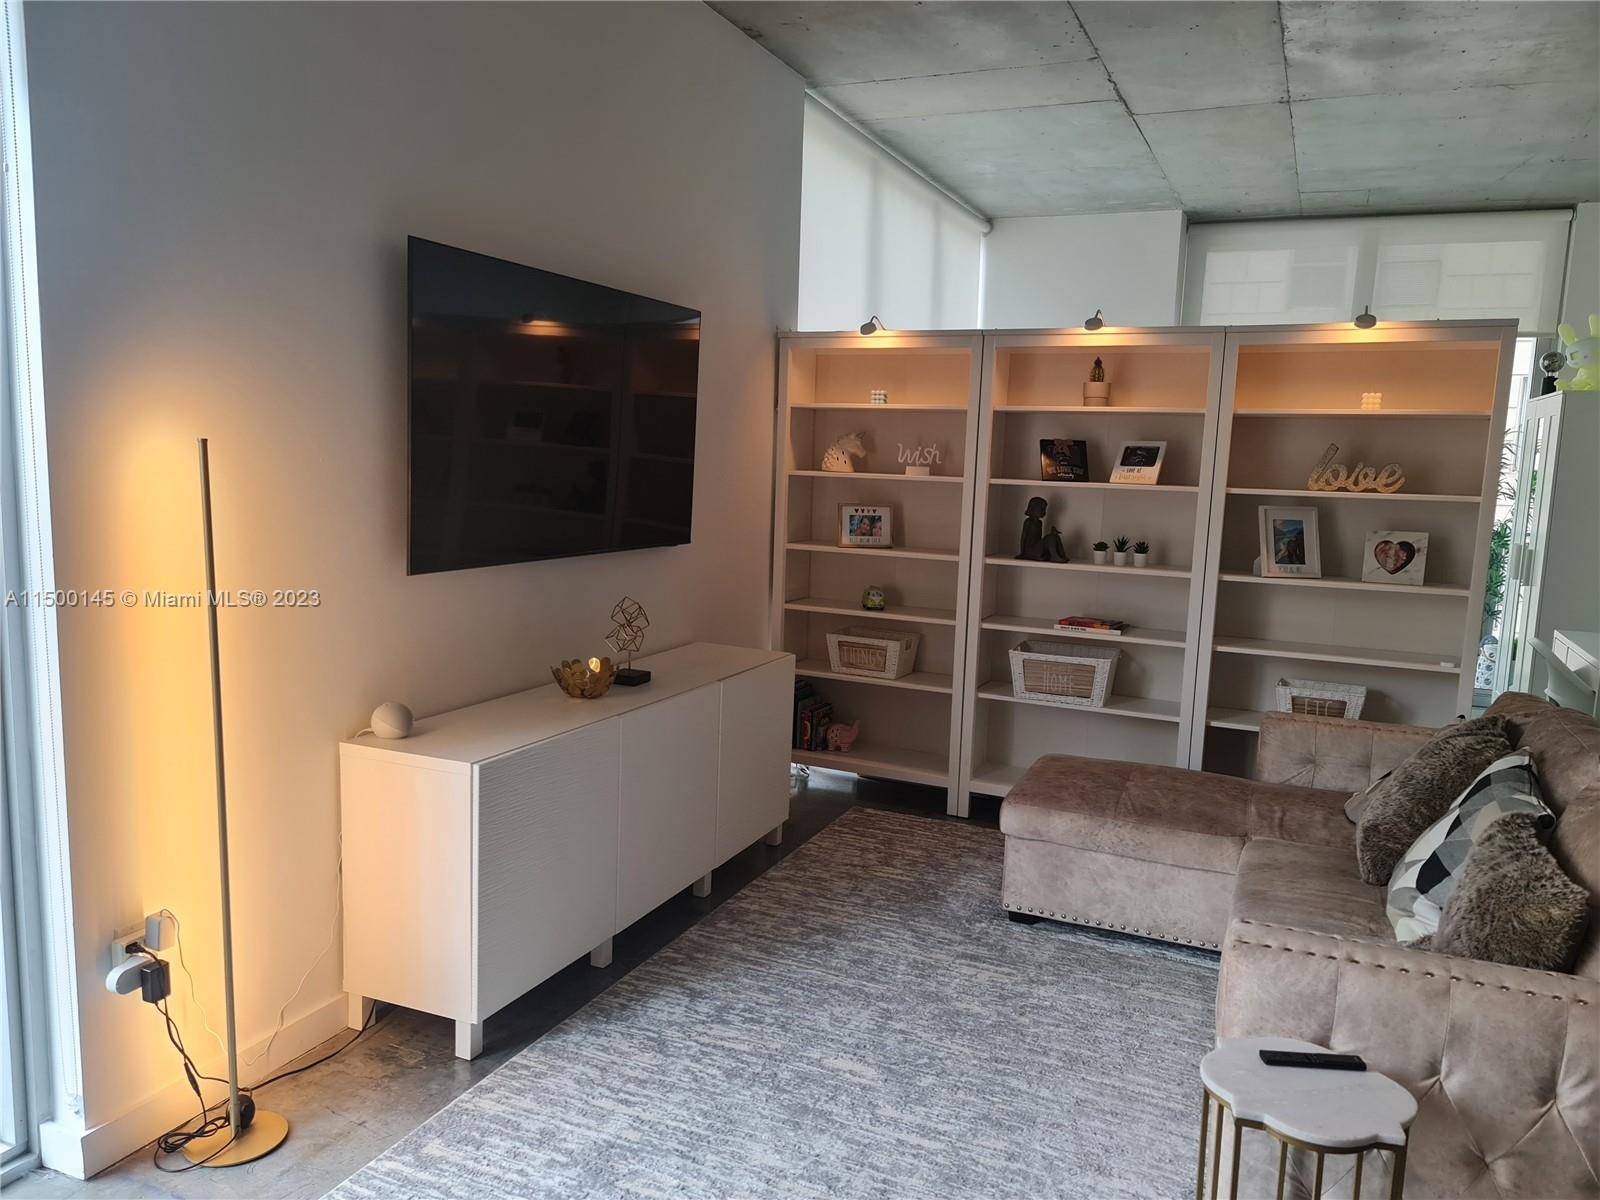 FULLY FURNISHED 1 Bed 1Bath, CONVERTED IN 2BED Experience the Luxurious Living in the Heart of Downtown Miami at Centro Condo.